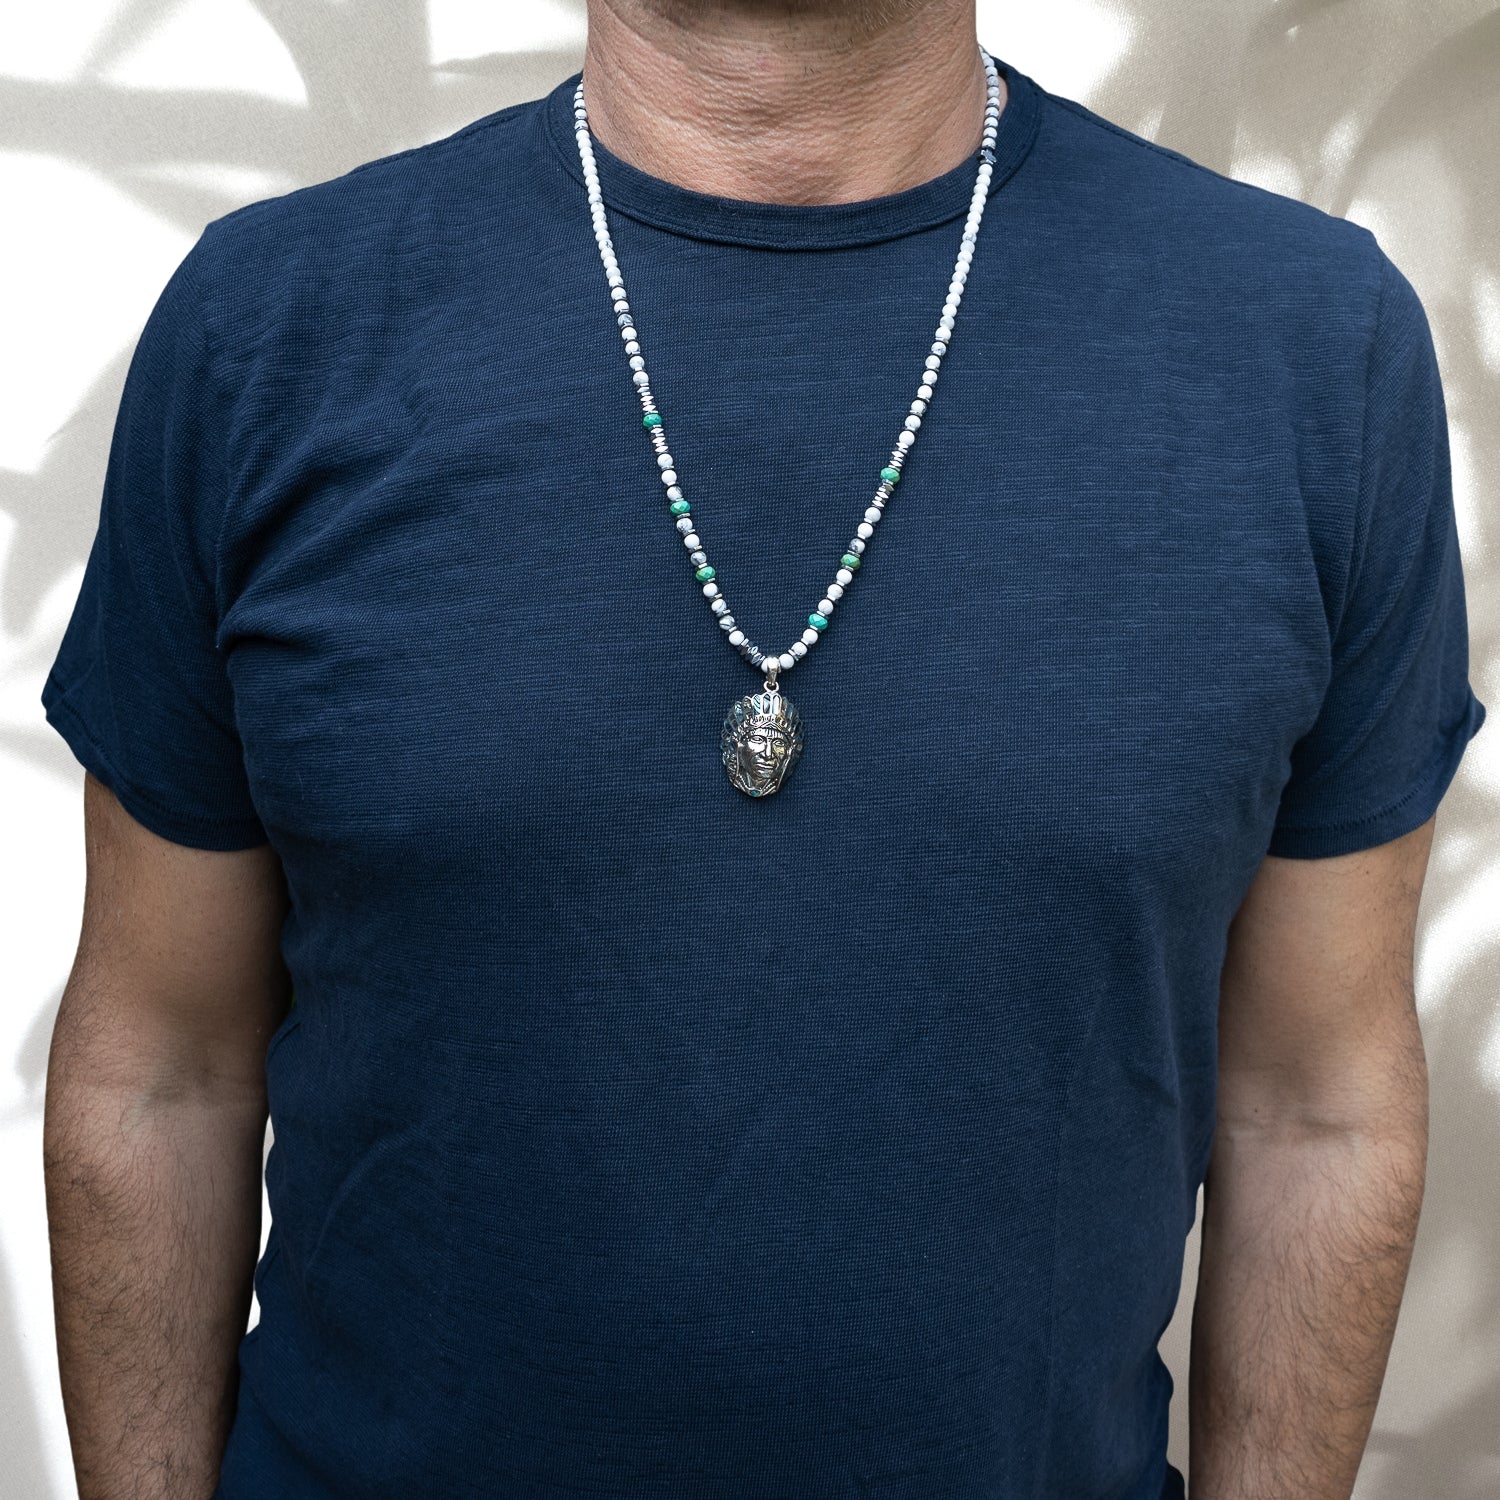 Model wearing the Native American Chief Necklace, showcasing its unique and bold design.